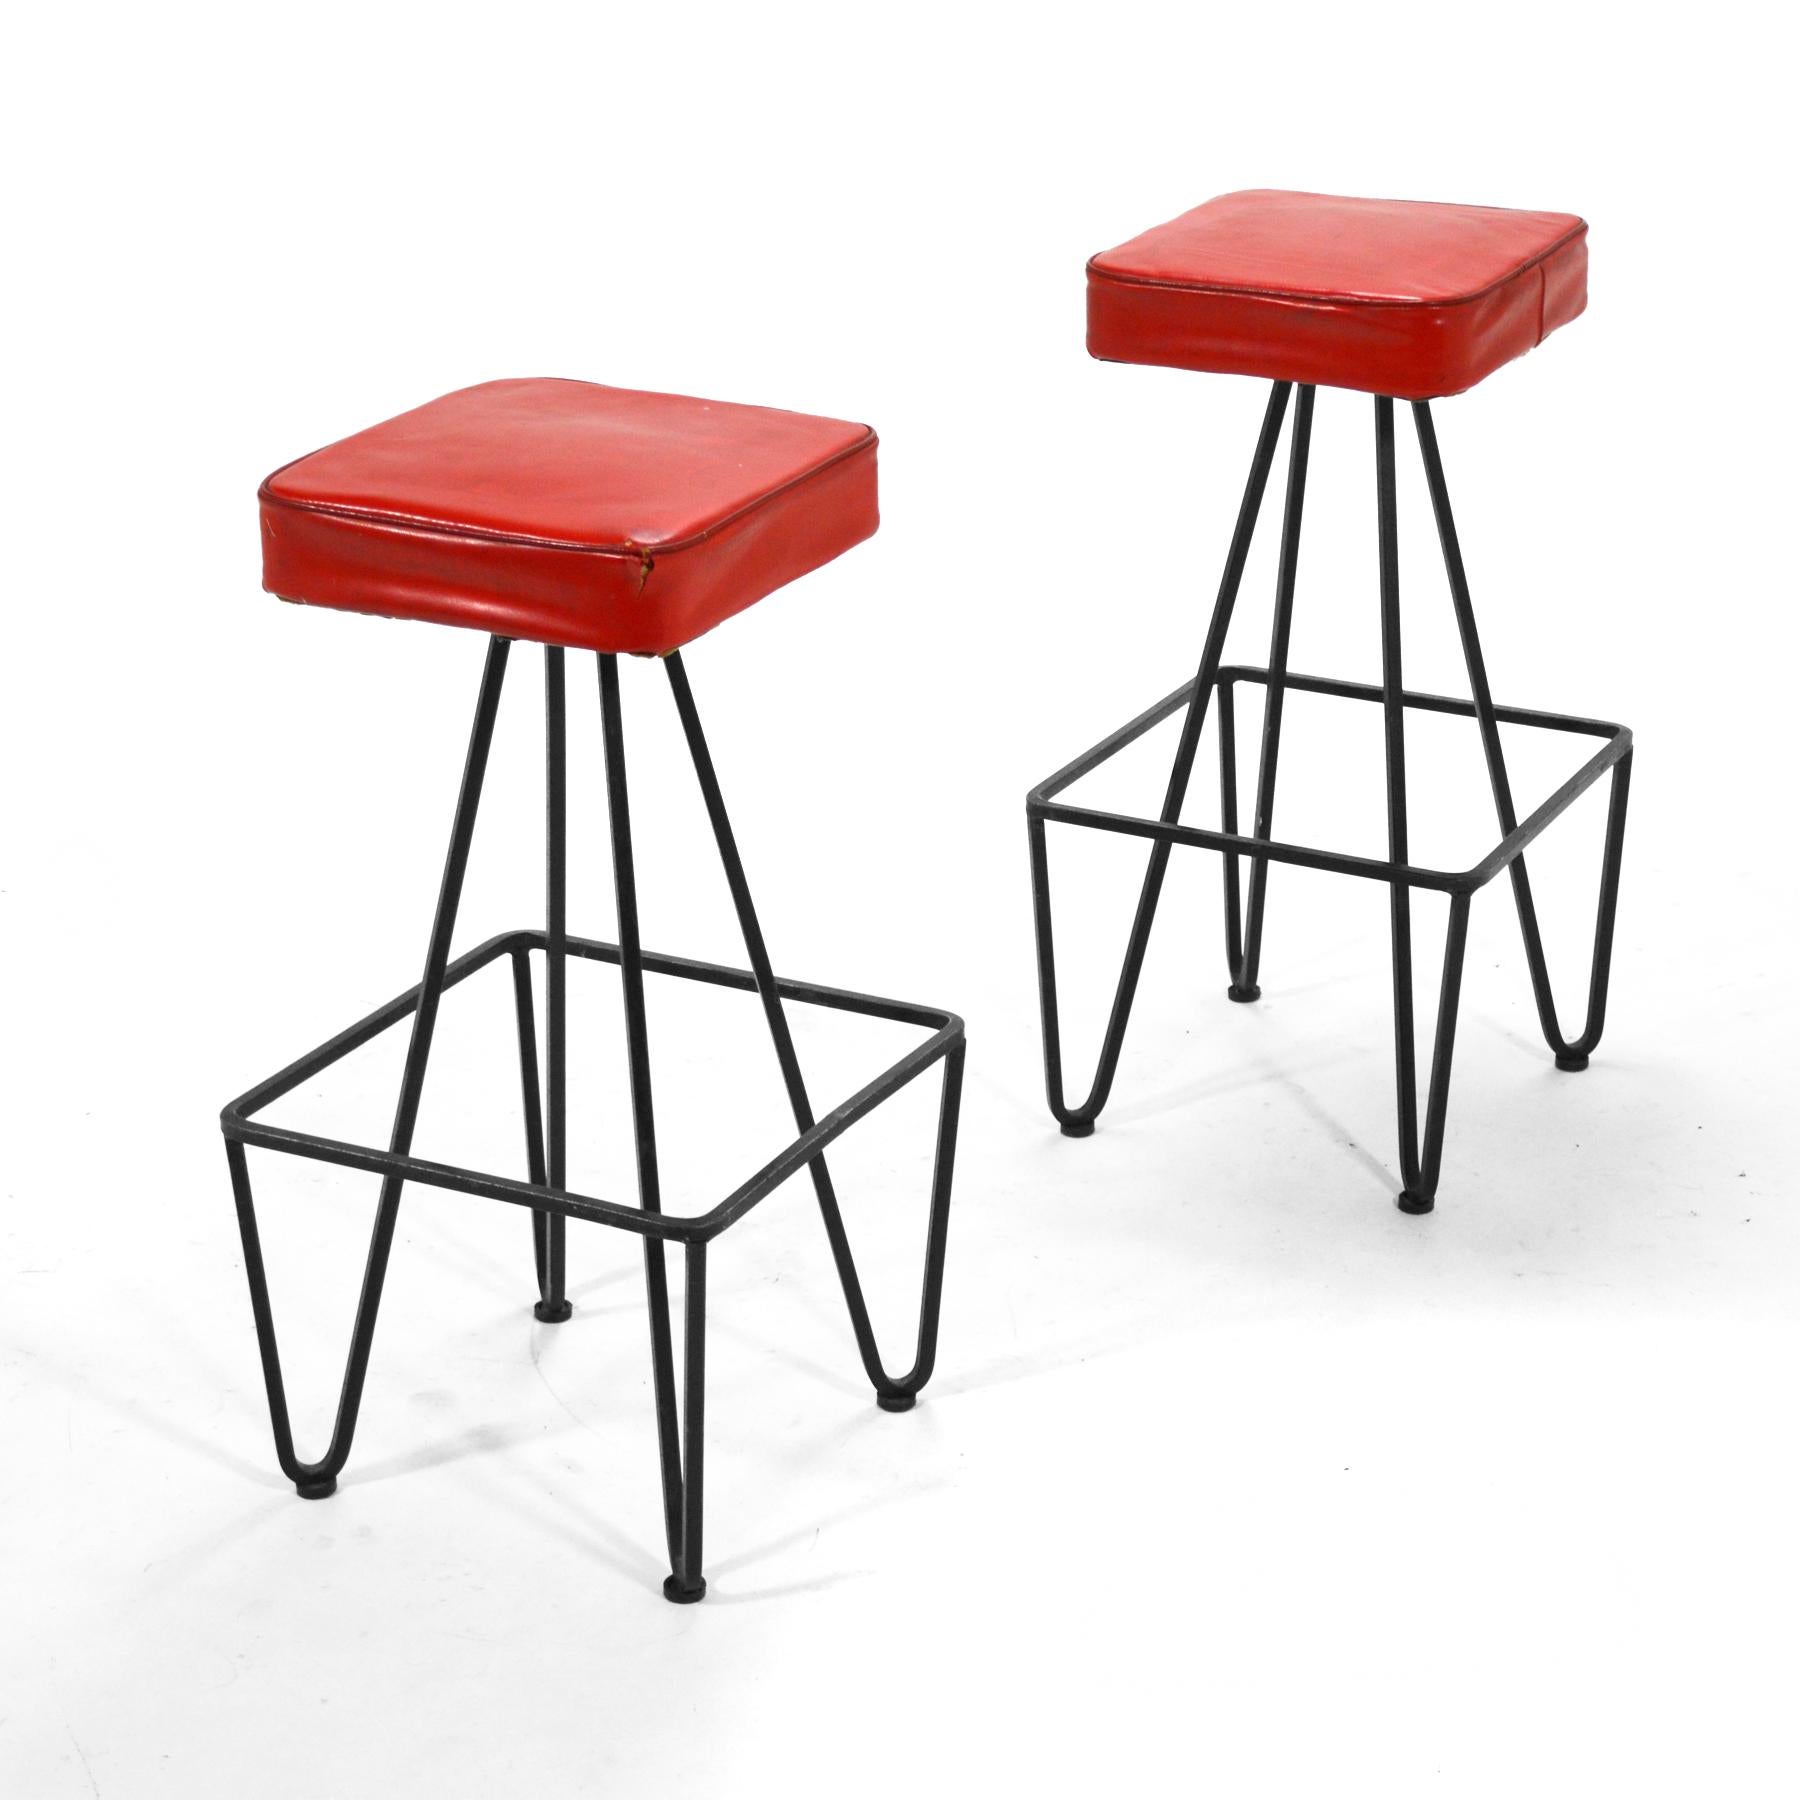 These two handsome stools have a great graphic quality and are built to last. They have bases of solid square stock iron and upholstered seats (the seats show their age and will likely need restoration). They are very reminiscent of the work of